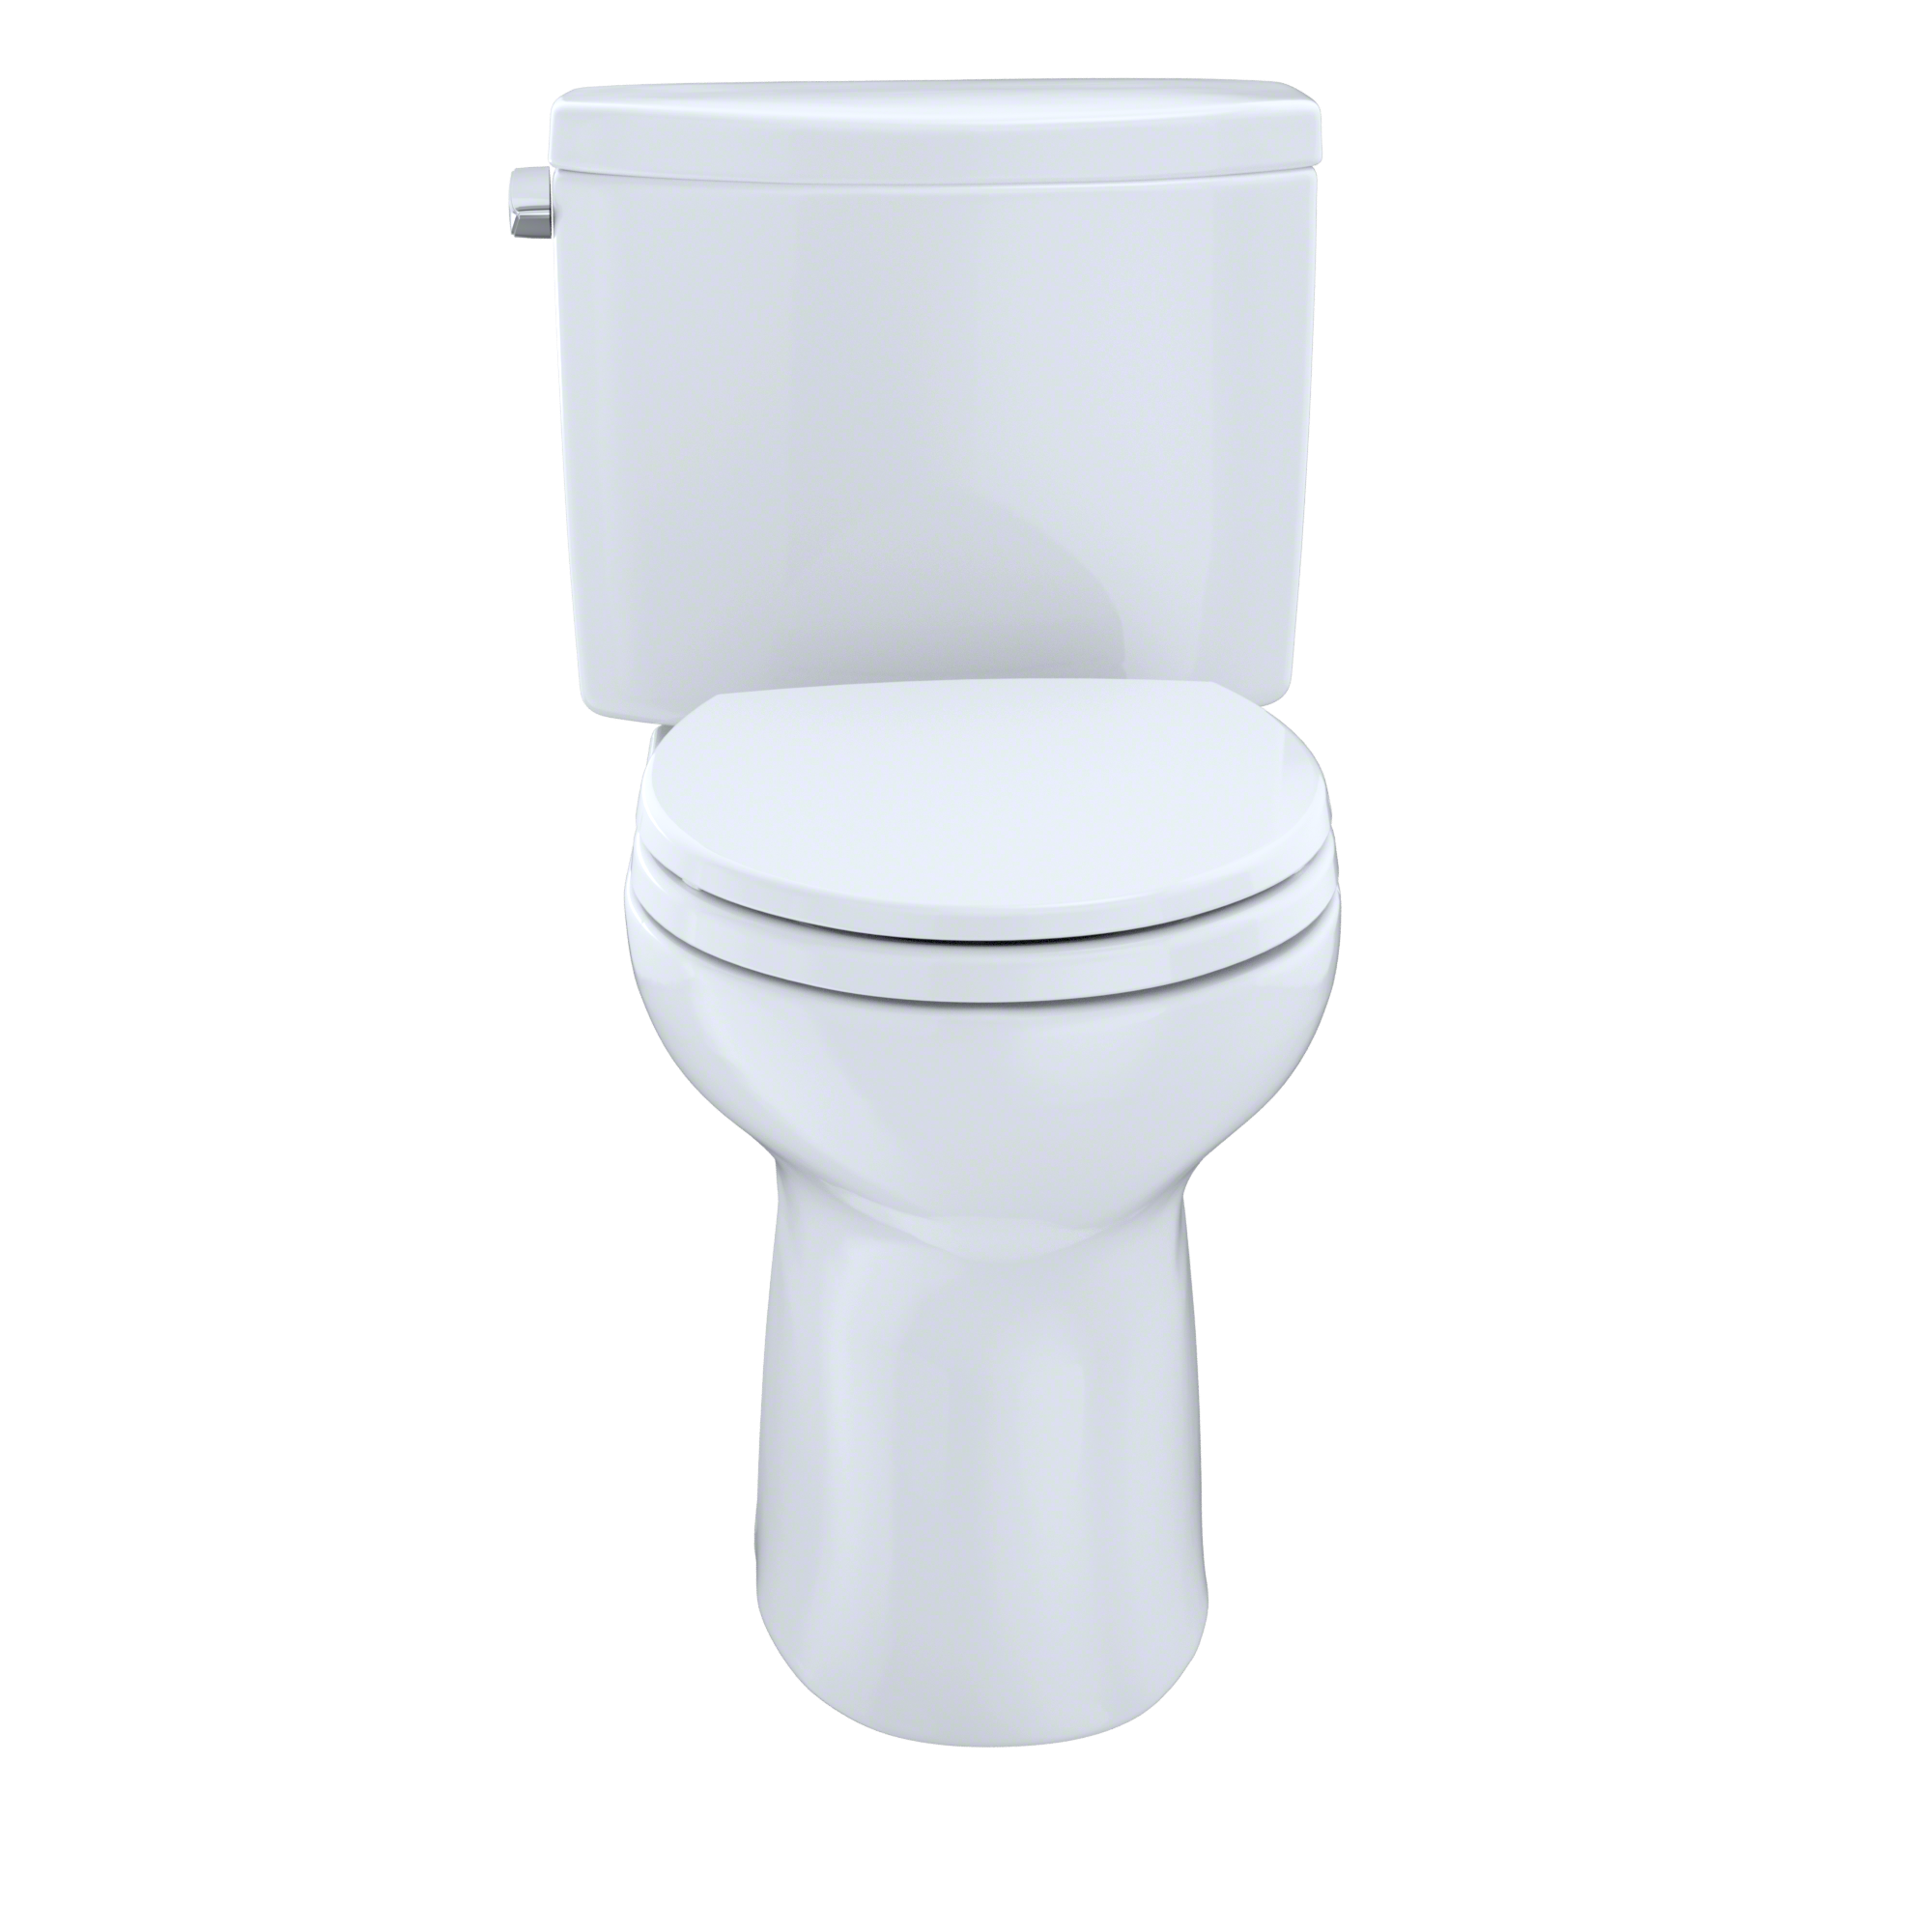 TOTO® Drake® II Two-Piece Round 1.28 GPF Universal Height Toilet with CEFIONTECT, Cotton White - CST453CEFG#01 - image 2 of 5